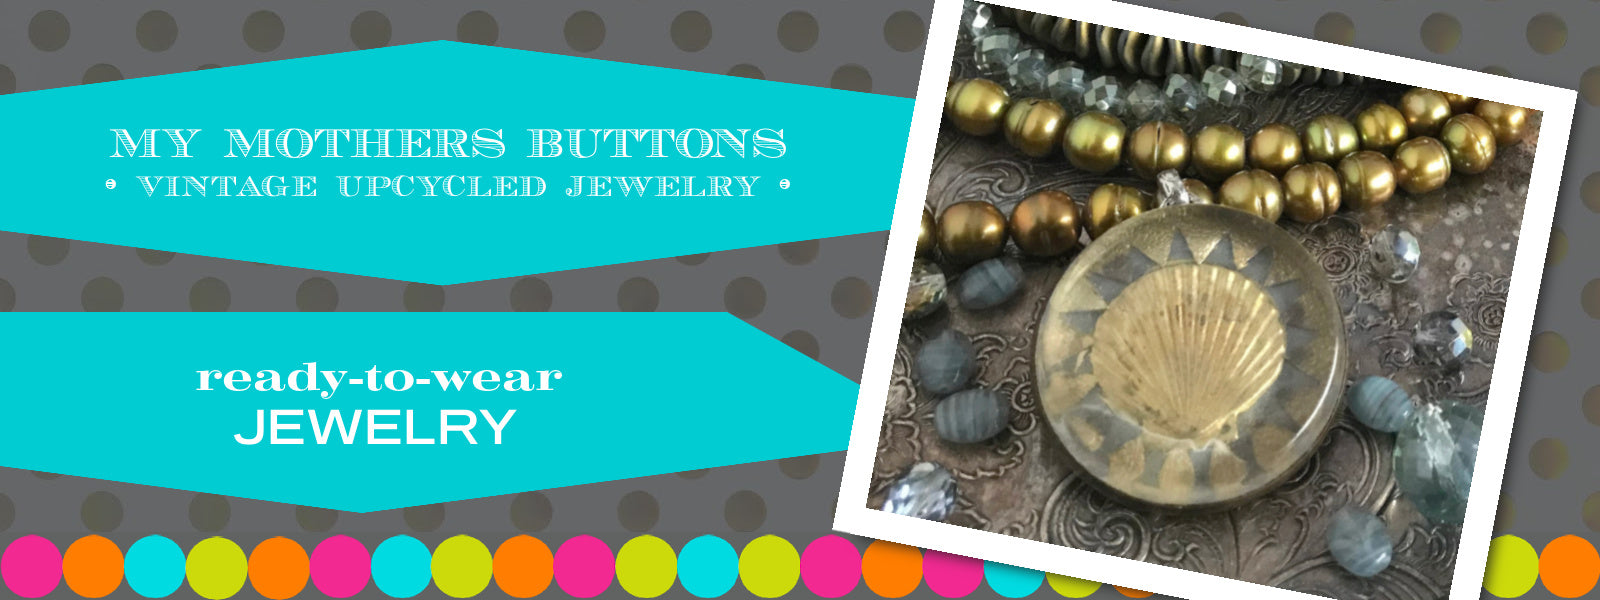 The creators of My Mothers Buttons jewelry transform the finest antique buttons and other circa 1800’s treasures from all over Europe to create one-of-a-kind heirloom jewelry. Suzie Q Studio is thrilled to share this wonderful jewelry line with you.